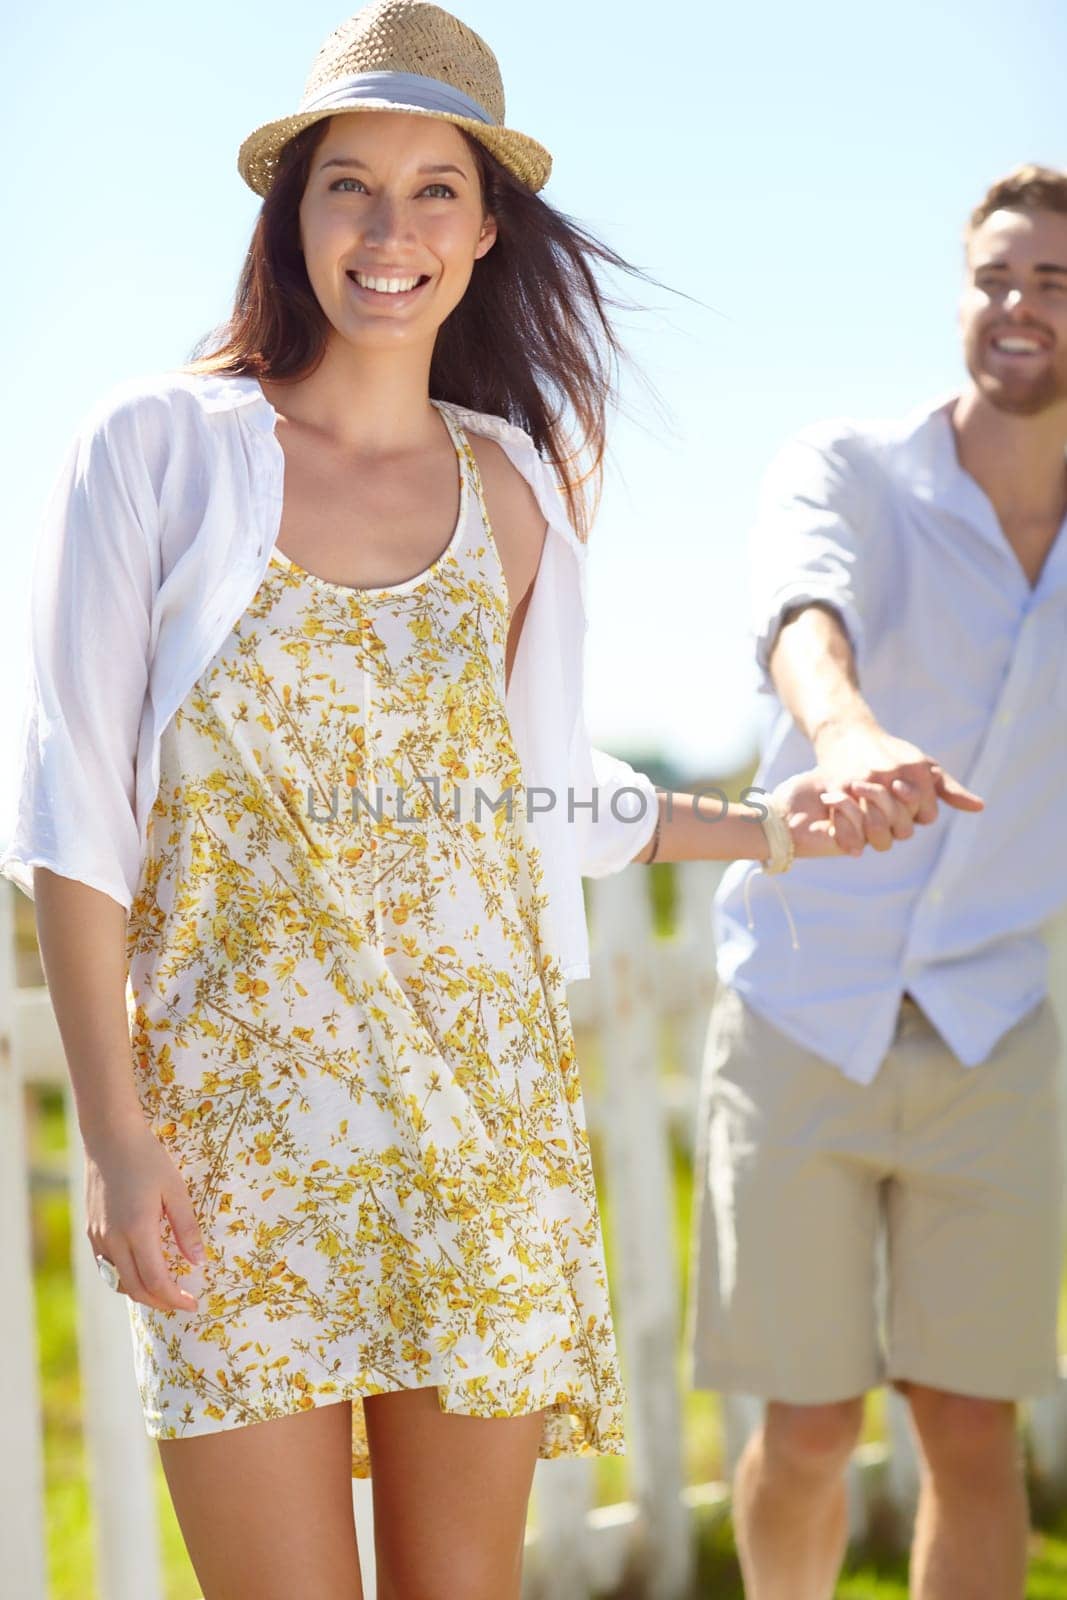 Couple, hands and smile for happy summer vacation, travel or journey together in the outdoors. Beautiful woman leading her boyfriend by the hand on a warm sunny day for the holiday in nature.